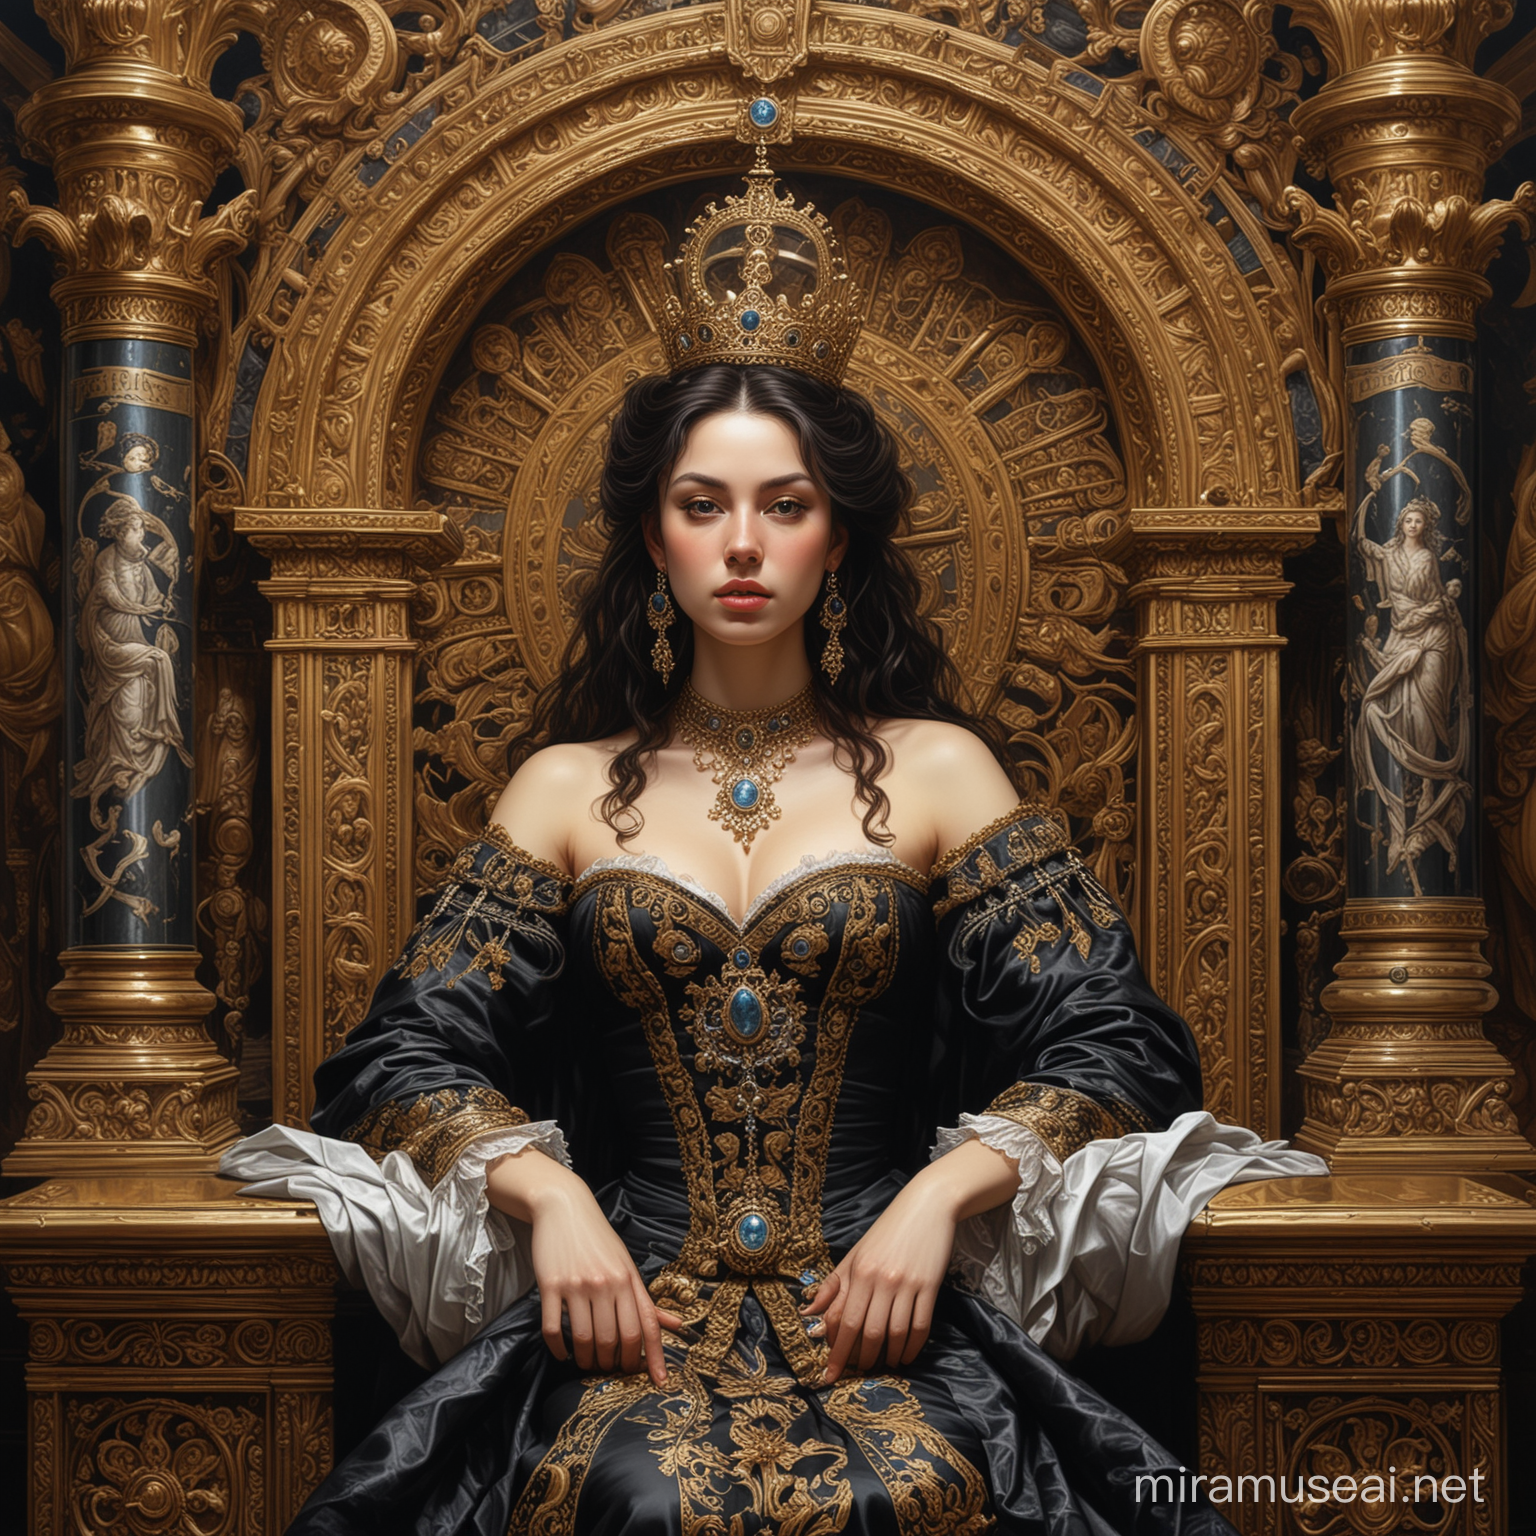 Countess,The image is a painting of a person sitting on a throne. It depicts Ilis Countofe of Kildare, Elip, the daughter of Rich, Dail ri Ranchogle, Zy Ast 7. Wof The Daughter of Land Wilowlis of Pahan. The painting features a woman in royal attire.The image is of a large ornate clock inside a building. The clock is located at the 10 o'clock position. The building appears to be a cathedral or a place of worship, featuring baroque and Byzantine architecture with symmetrical design elements.Lying on back with face to the side.Black woman beautiful face is shown.  The woman's body parts such as chest, thigh, stomach, and abdomen are visible.painterly smooth, extremely sharp detail, finely tuned detail, 8 k, ultra sharp focus, illustration, illustration, art by Ayami Kojima Beautiful Thick Black